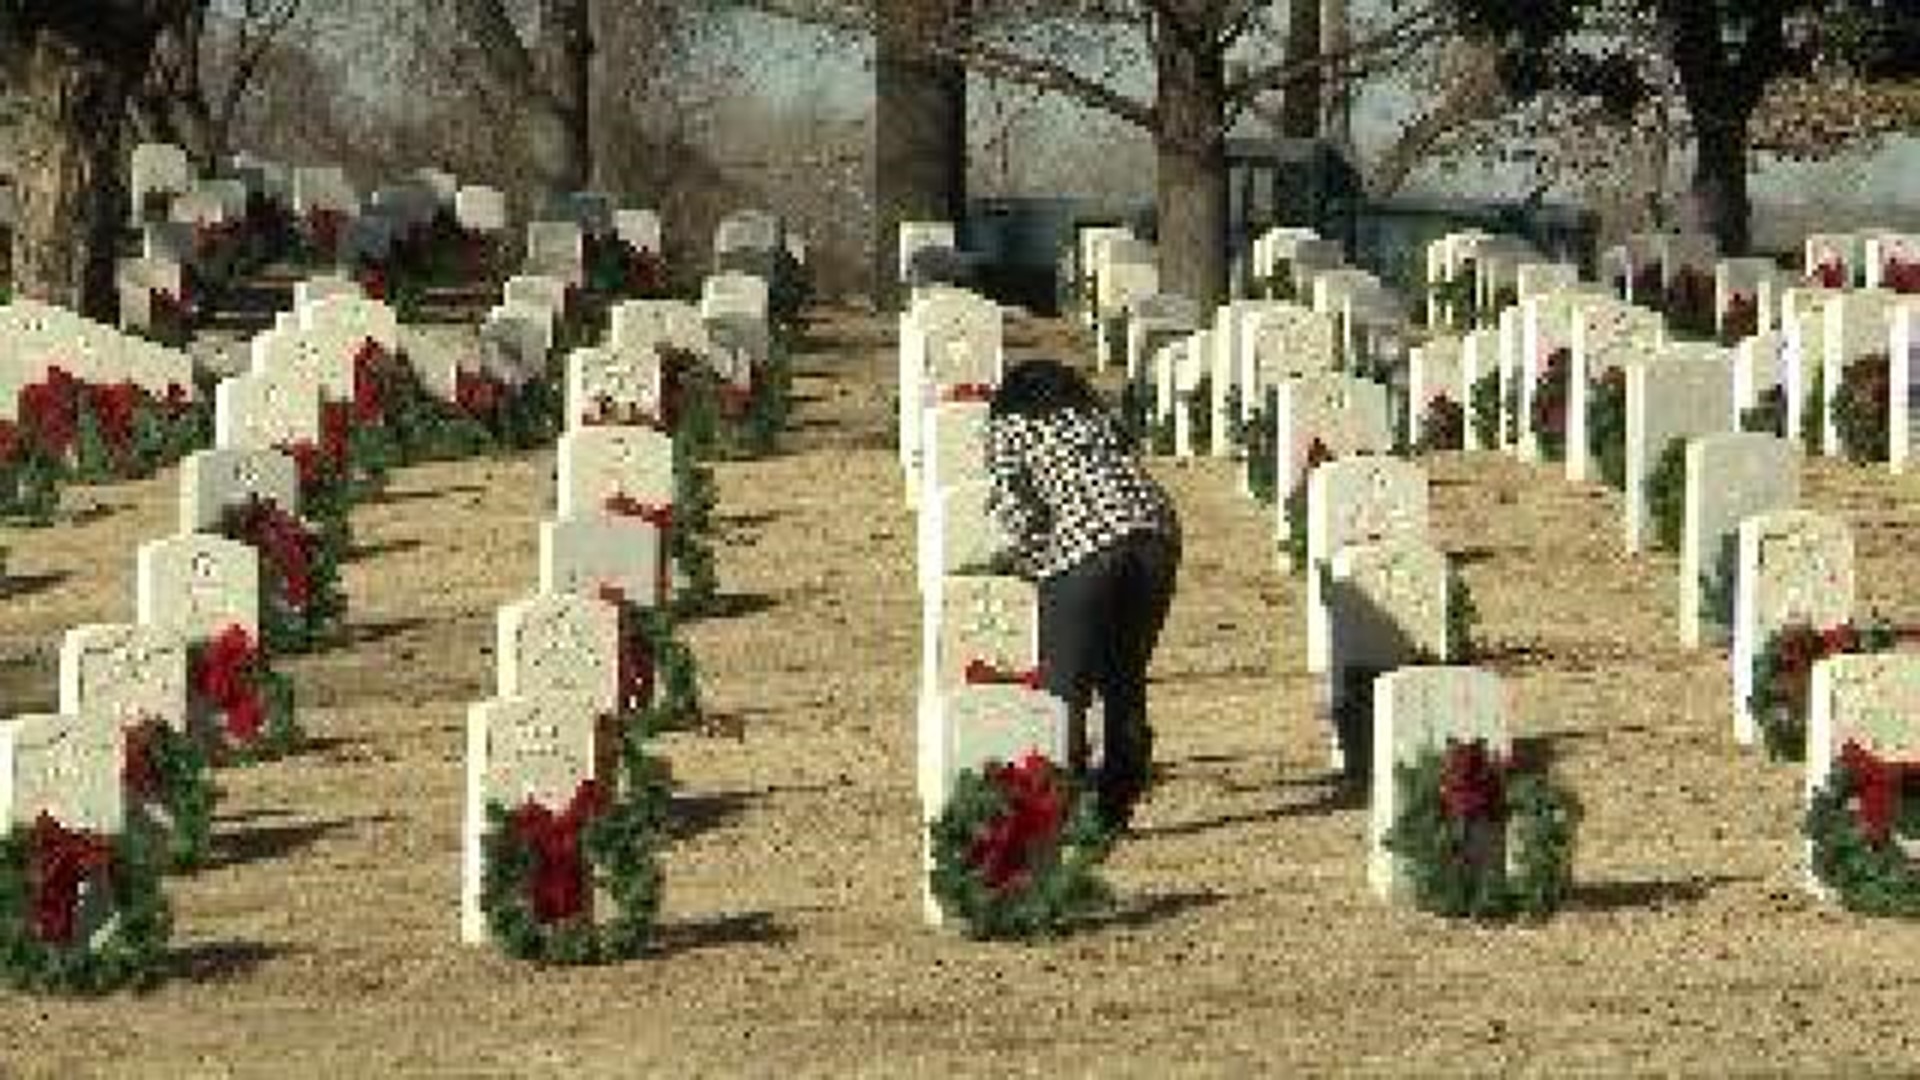 Community Replaces Wreaths at Cemetery After Storm